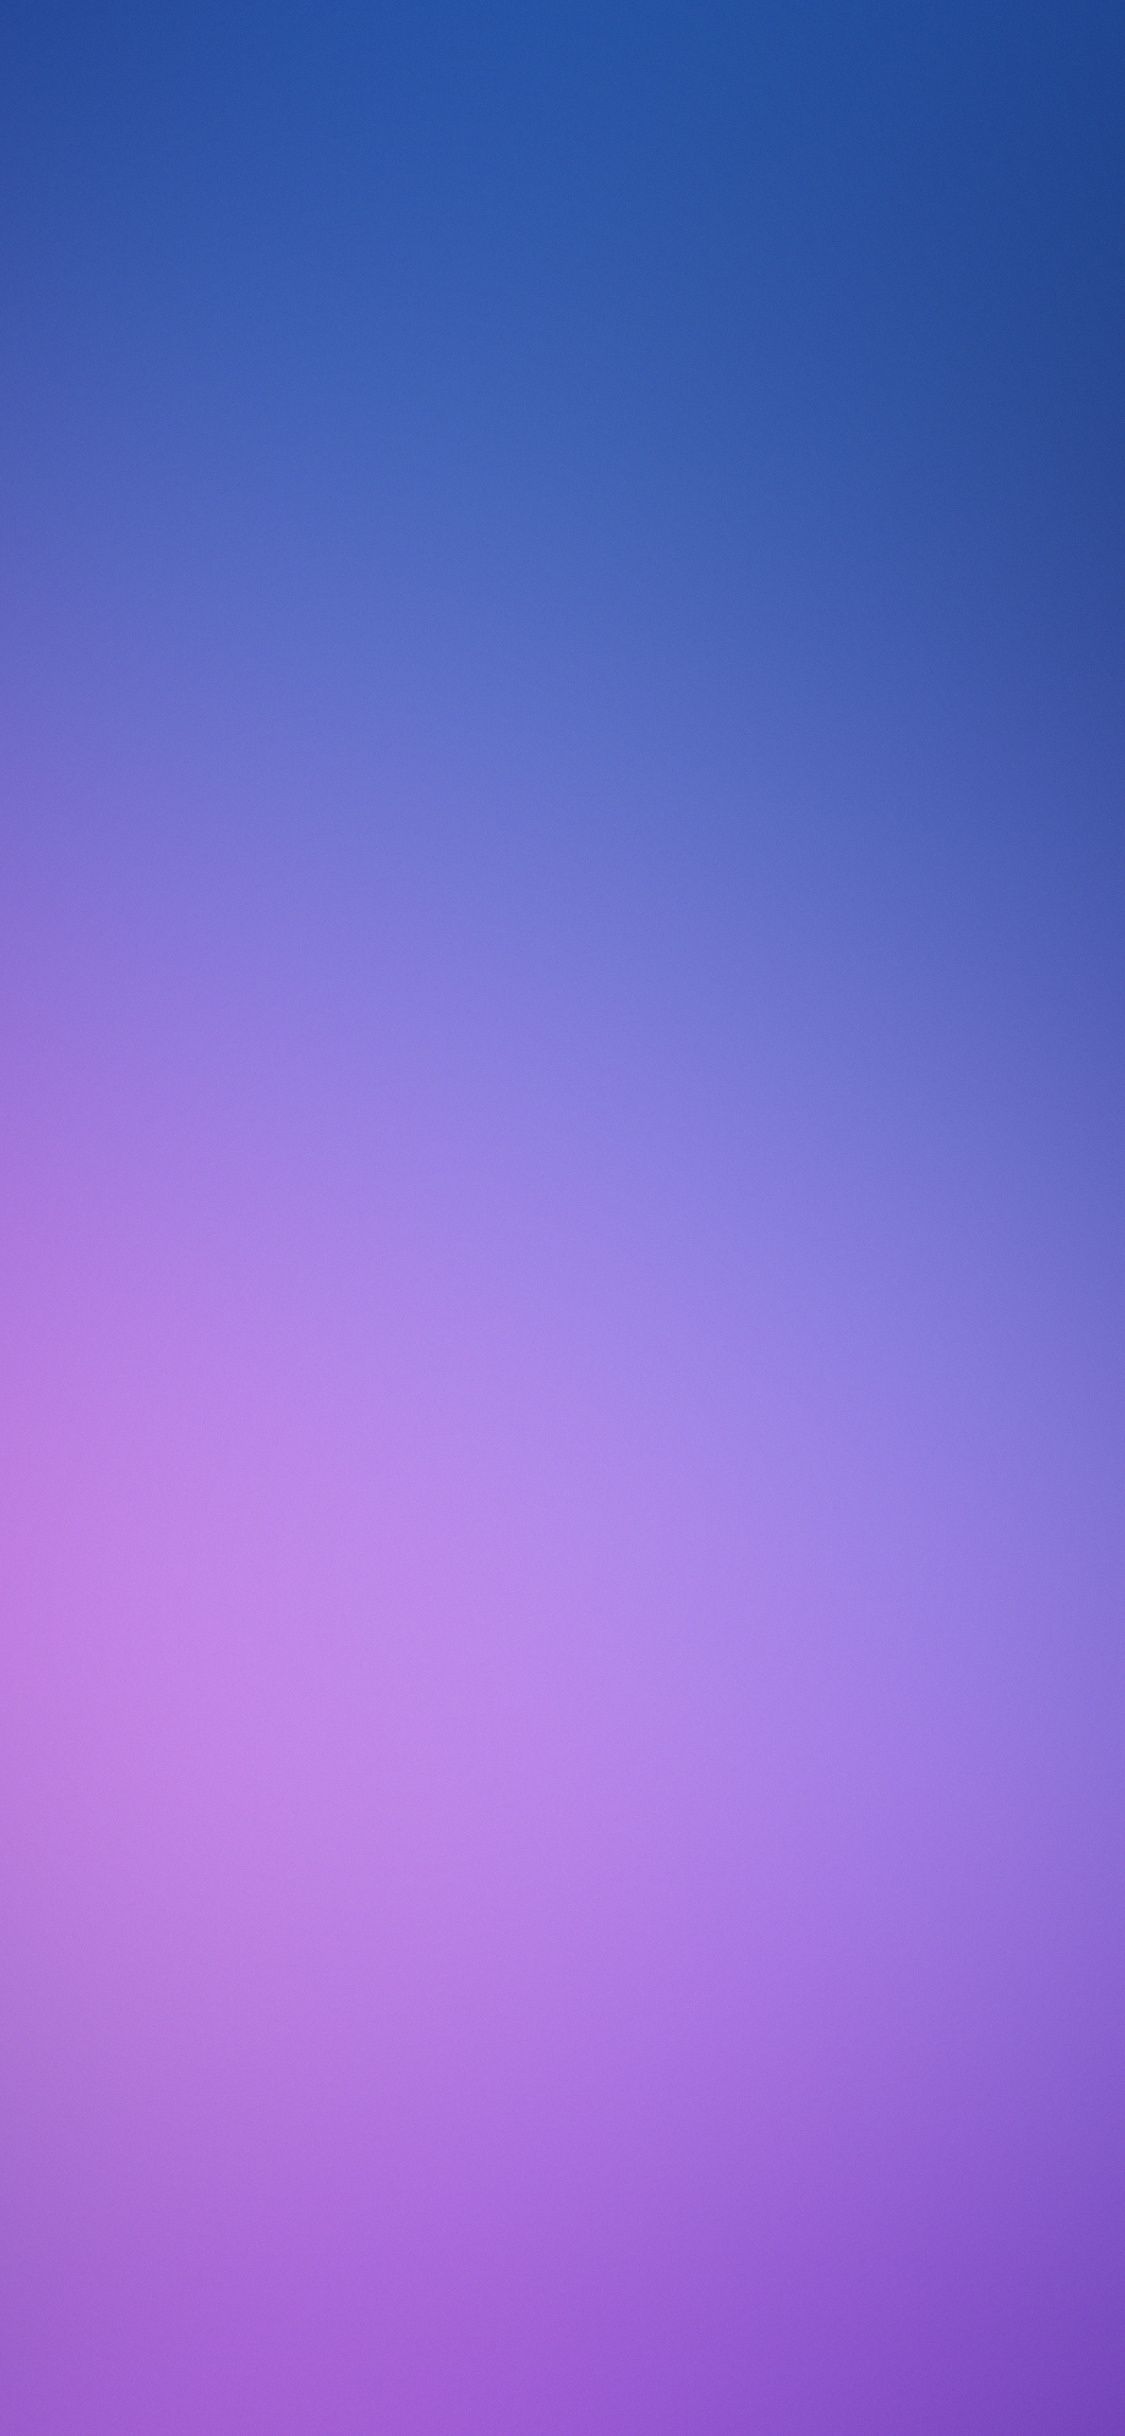 Purple gradient background Images  Search Images on Everypixel